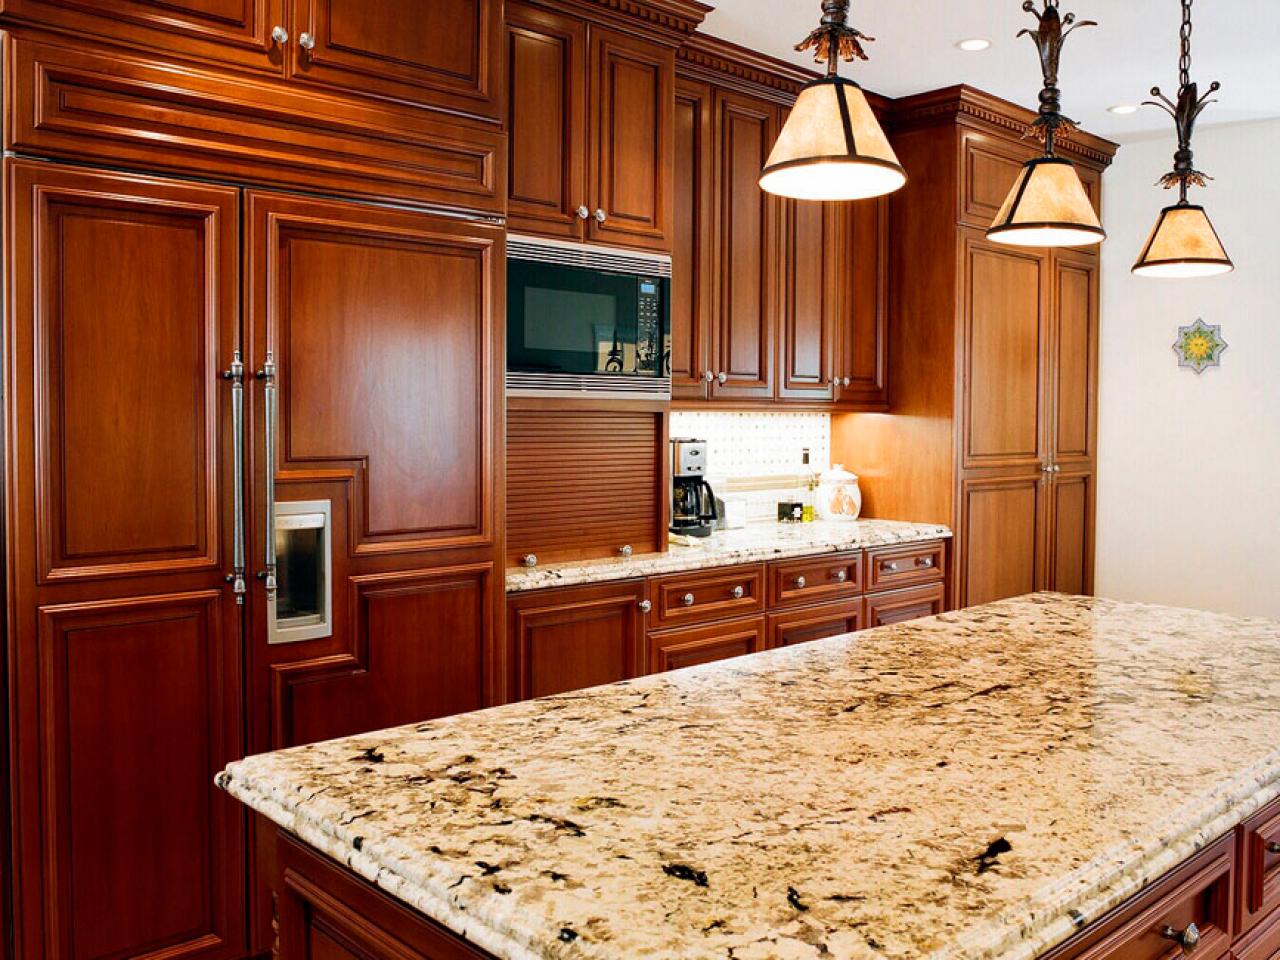 The Role of Cabinetry in a Kitchen Renovation